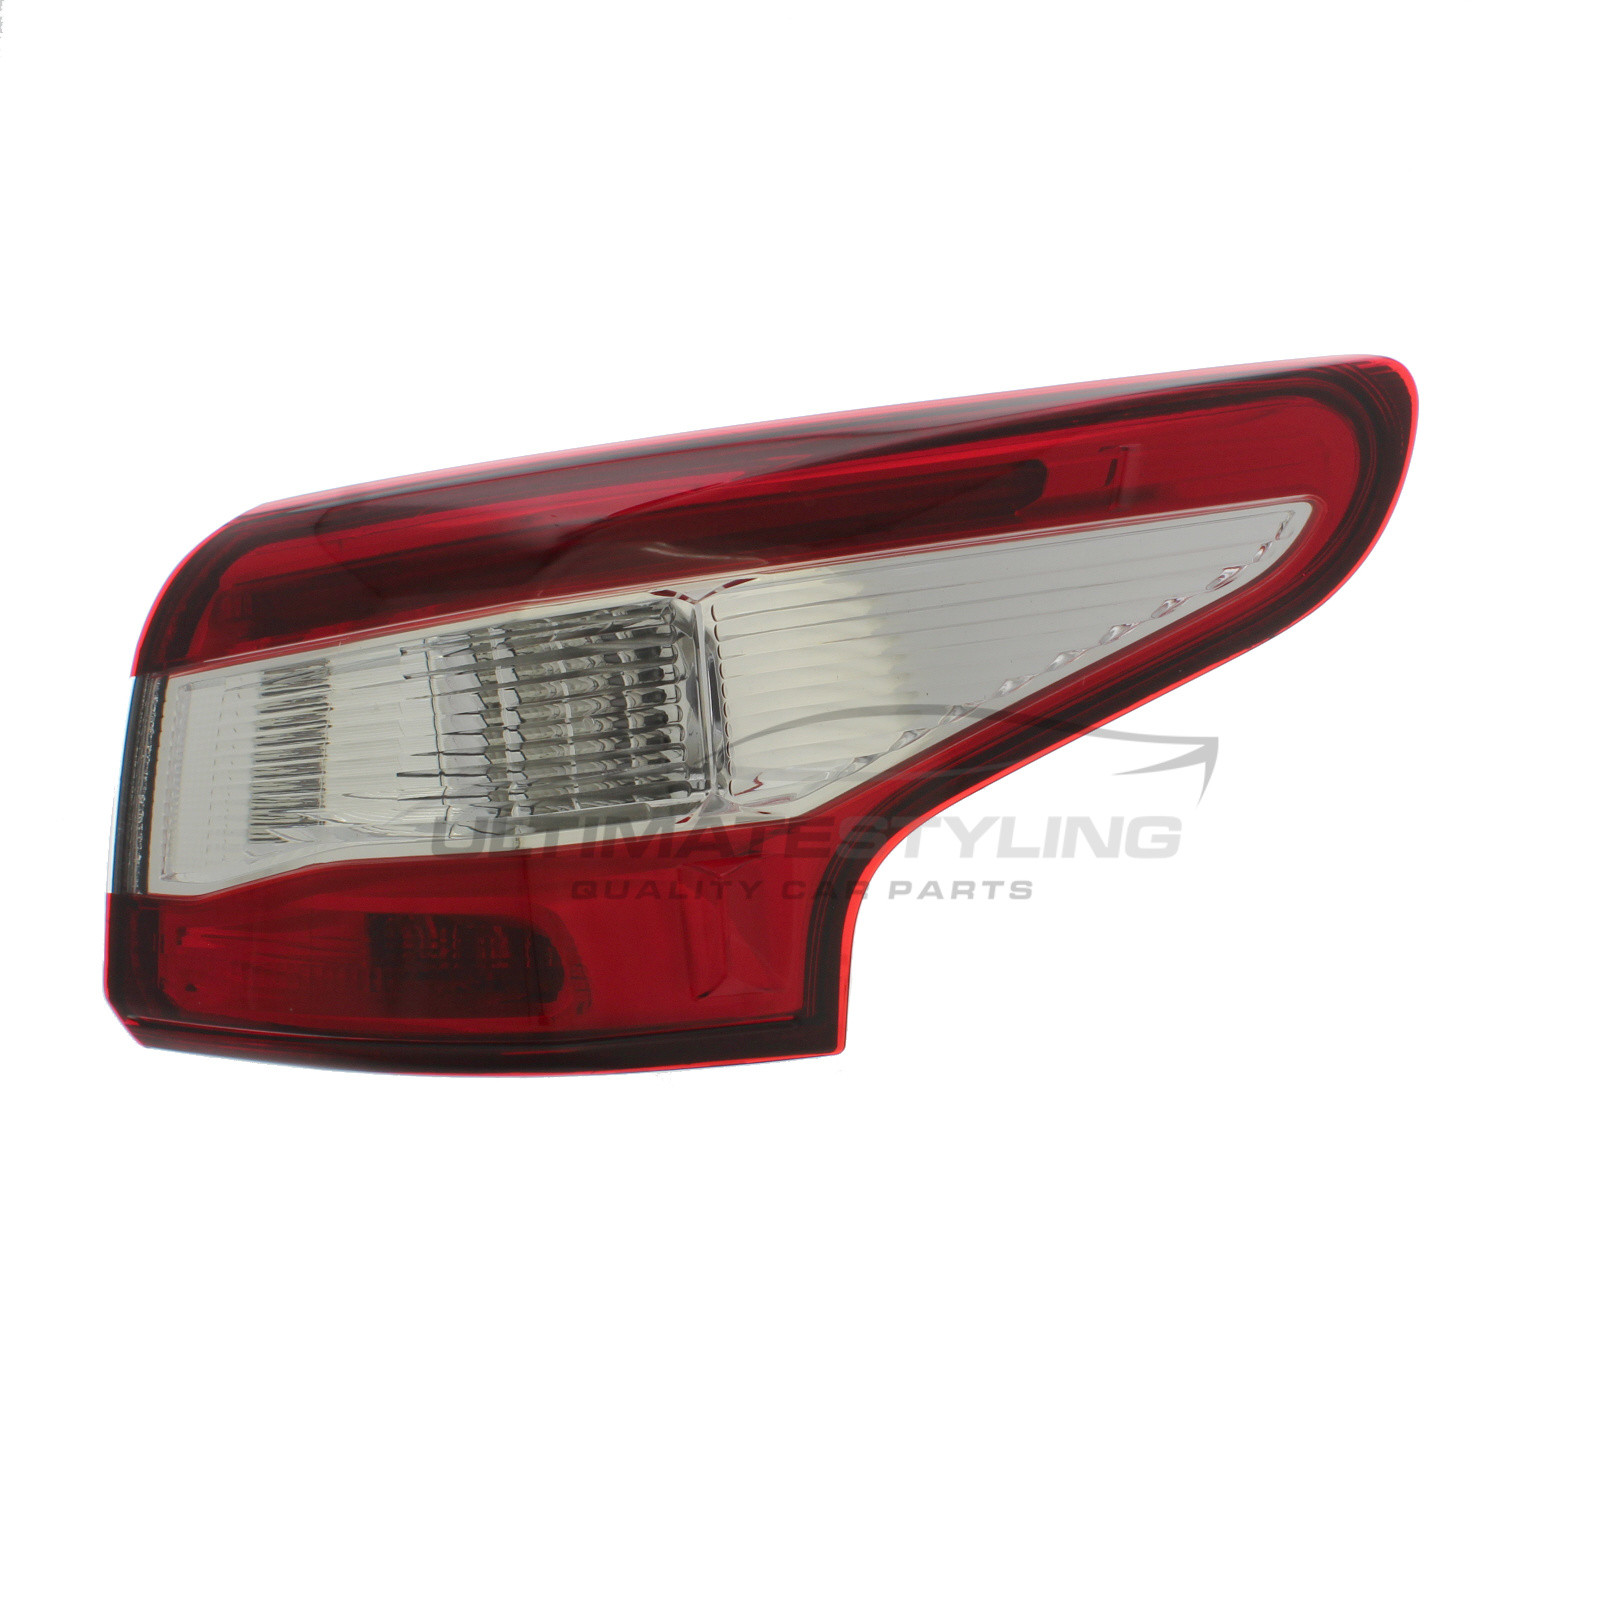 Nissan Qashqai 2013-2017 LED Outer (Wing) Rear Light / Tail Light Excluding Bulb Holder Drivers Side (RH)